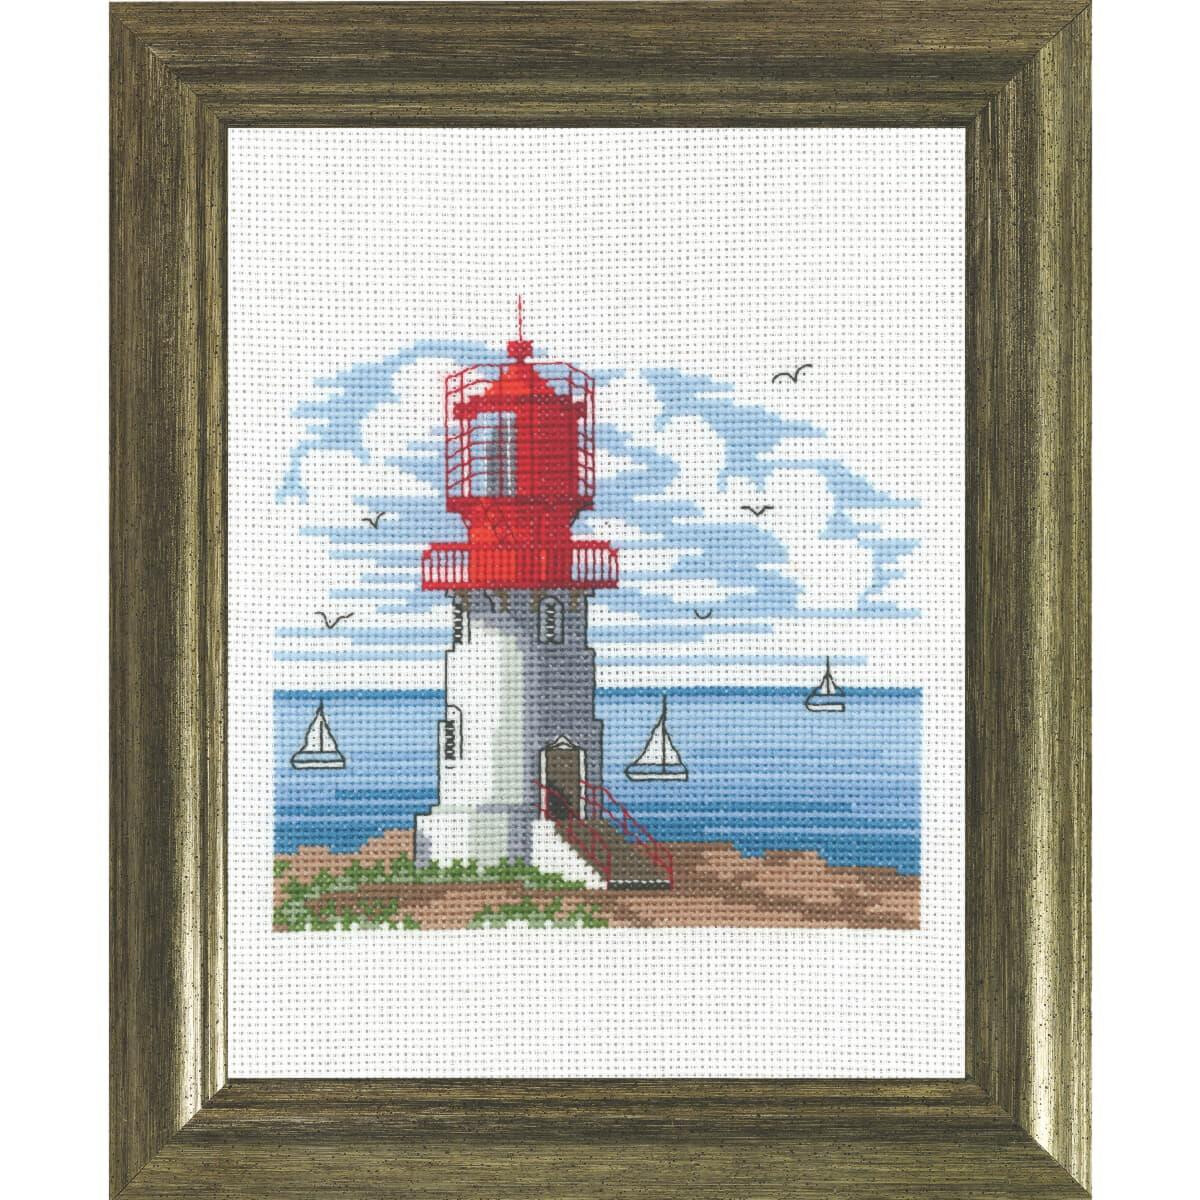 Permin counted cross stitch kit "Lighthouse",...